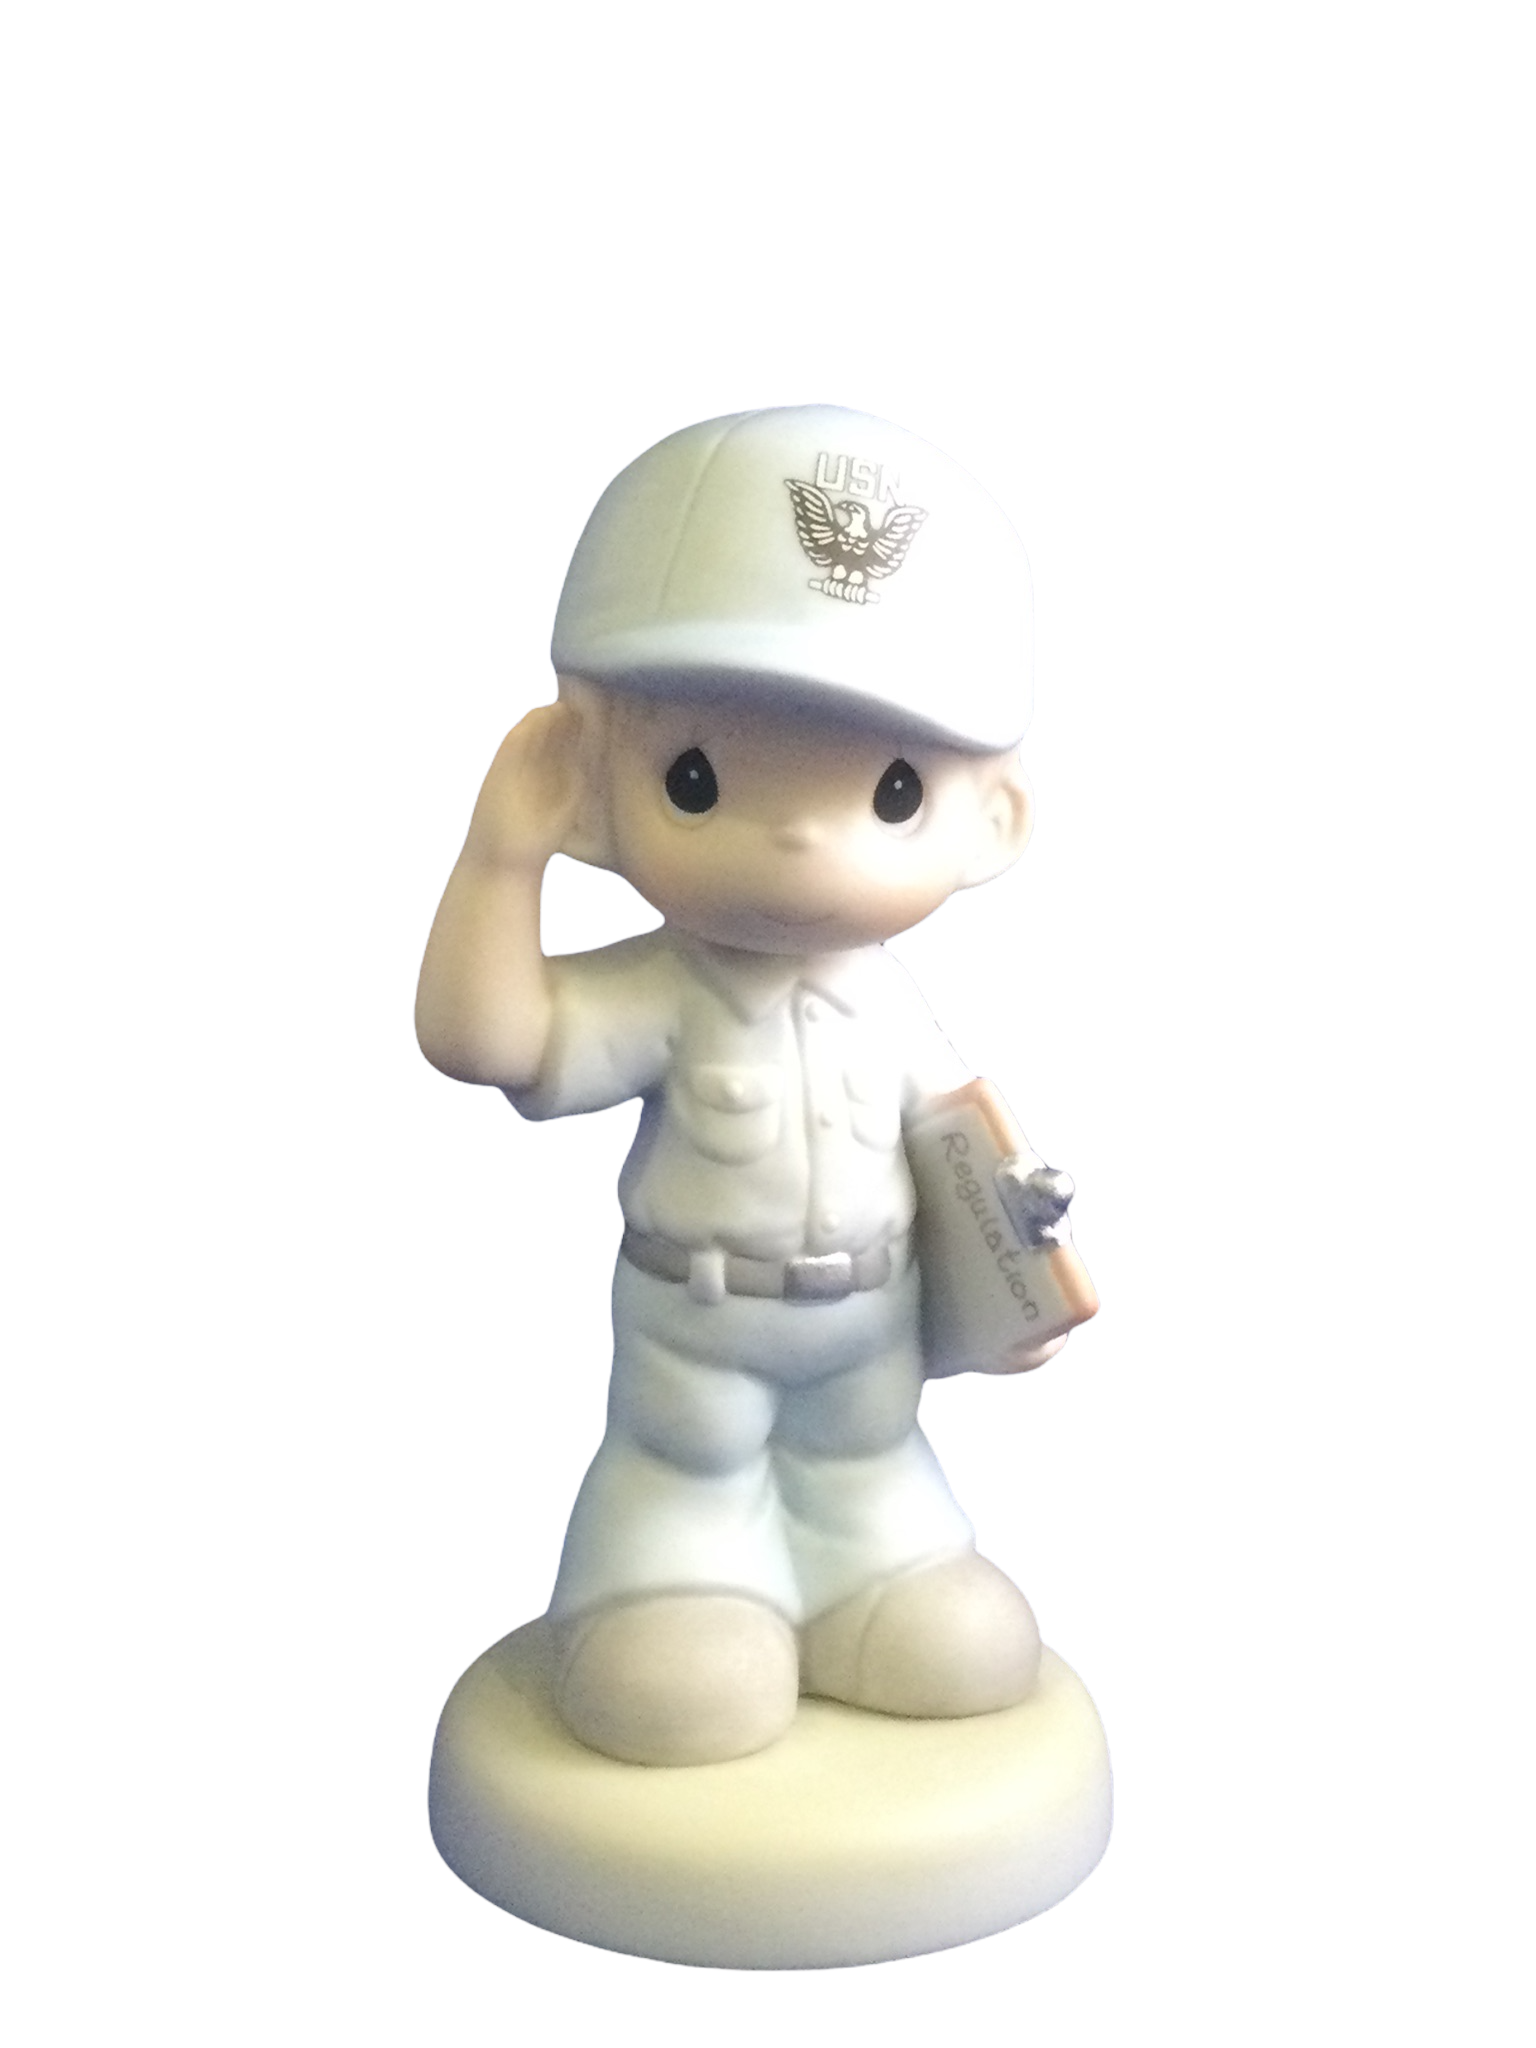 I'm Proud To Be An American  - Navy - Precious Moment Figurine